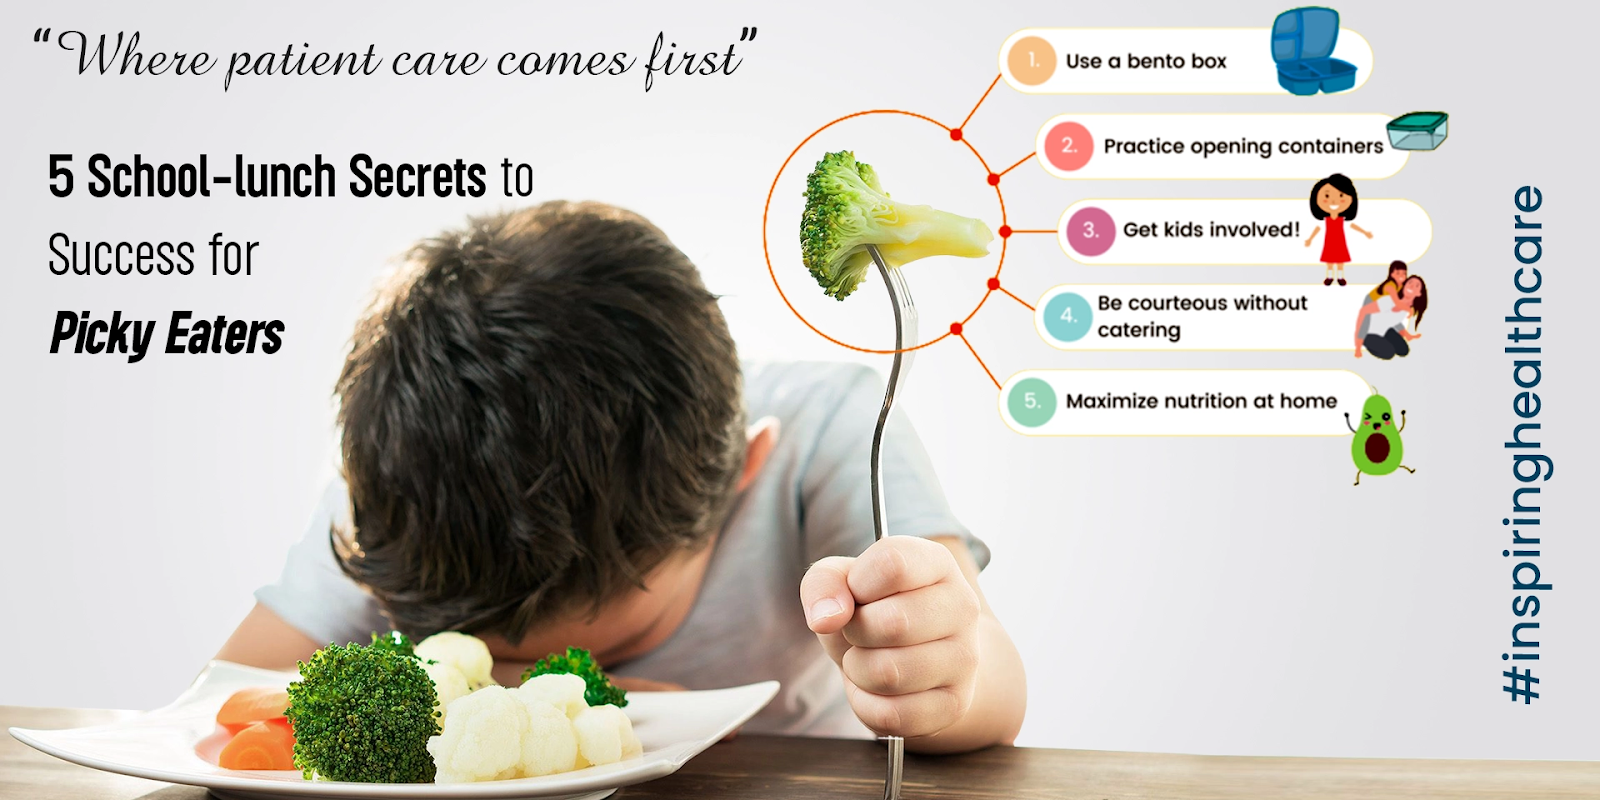 Strategies for Nutrition Tips for Picky Eaters